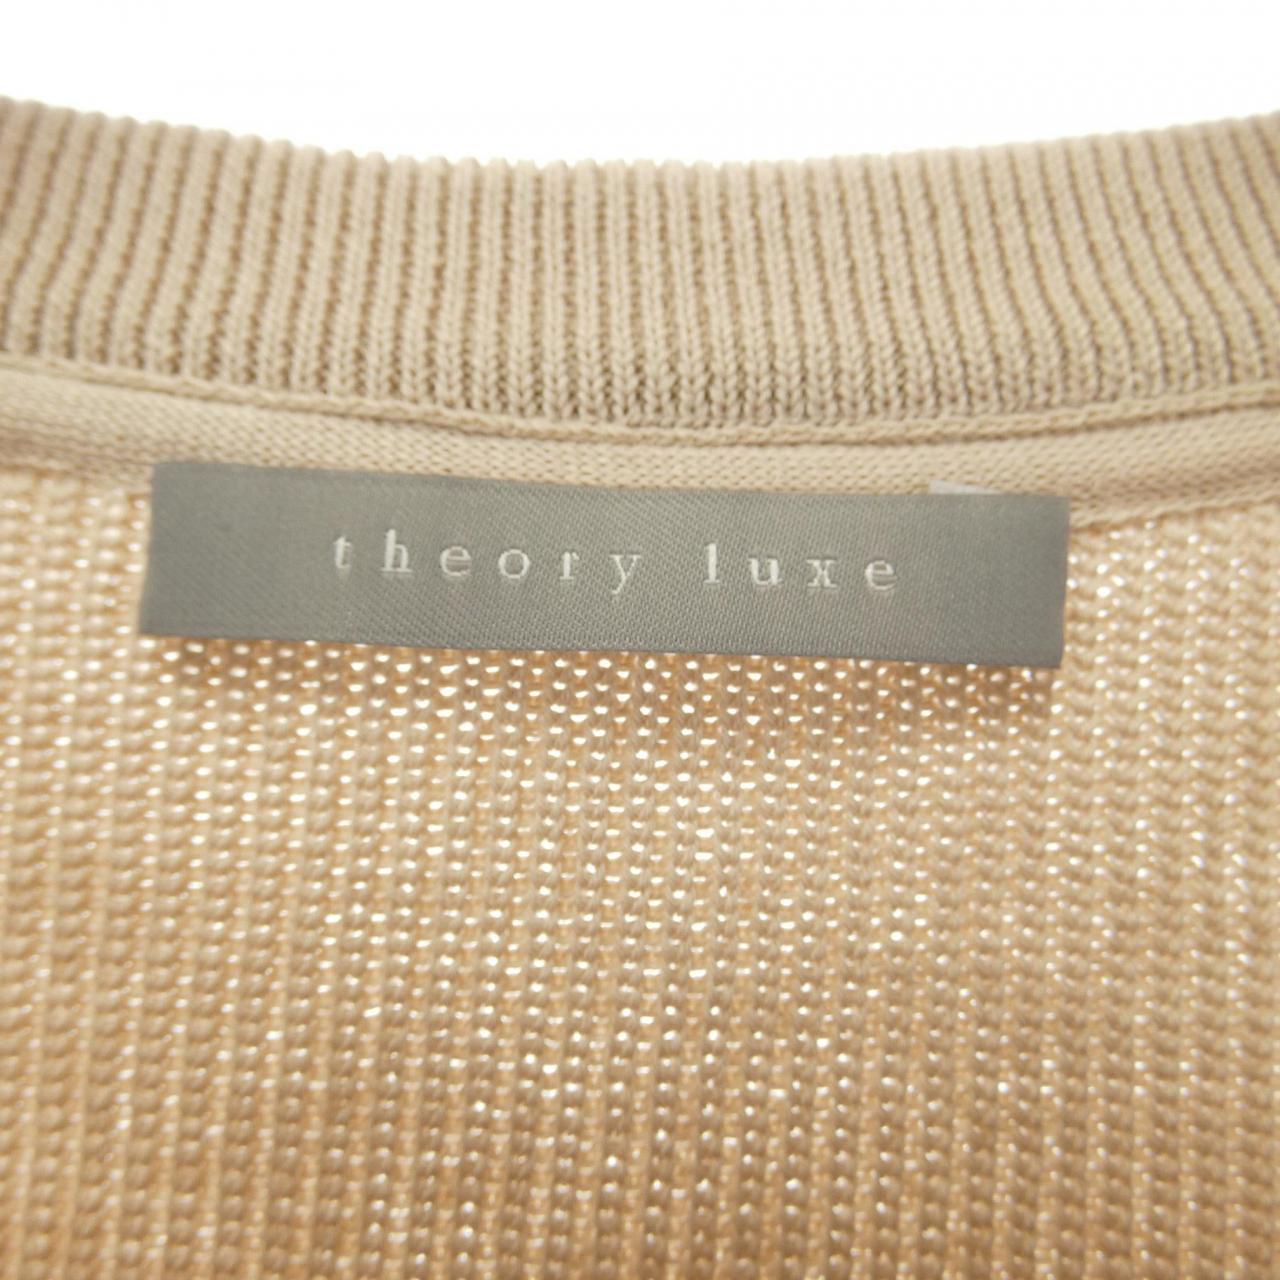 Theory luxe knit